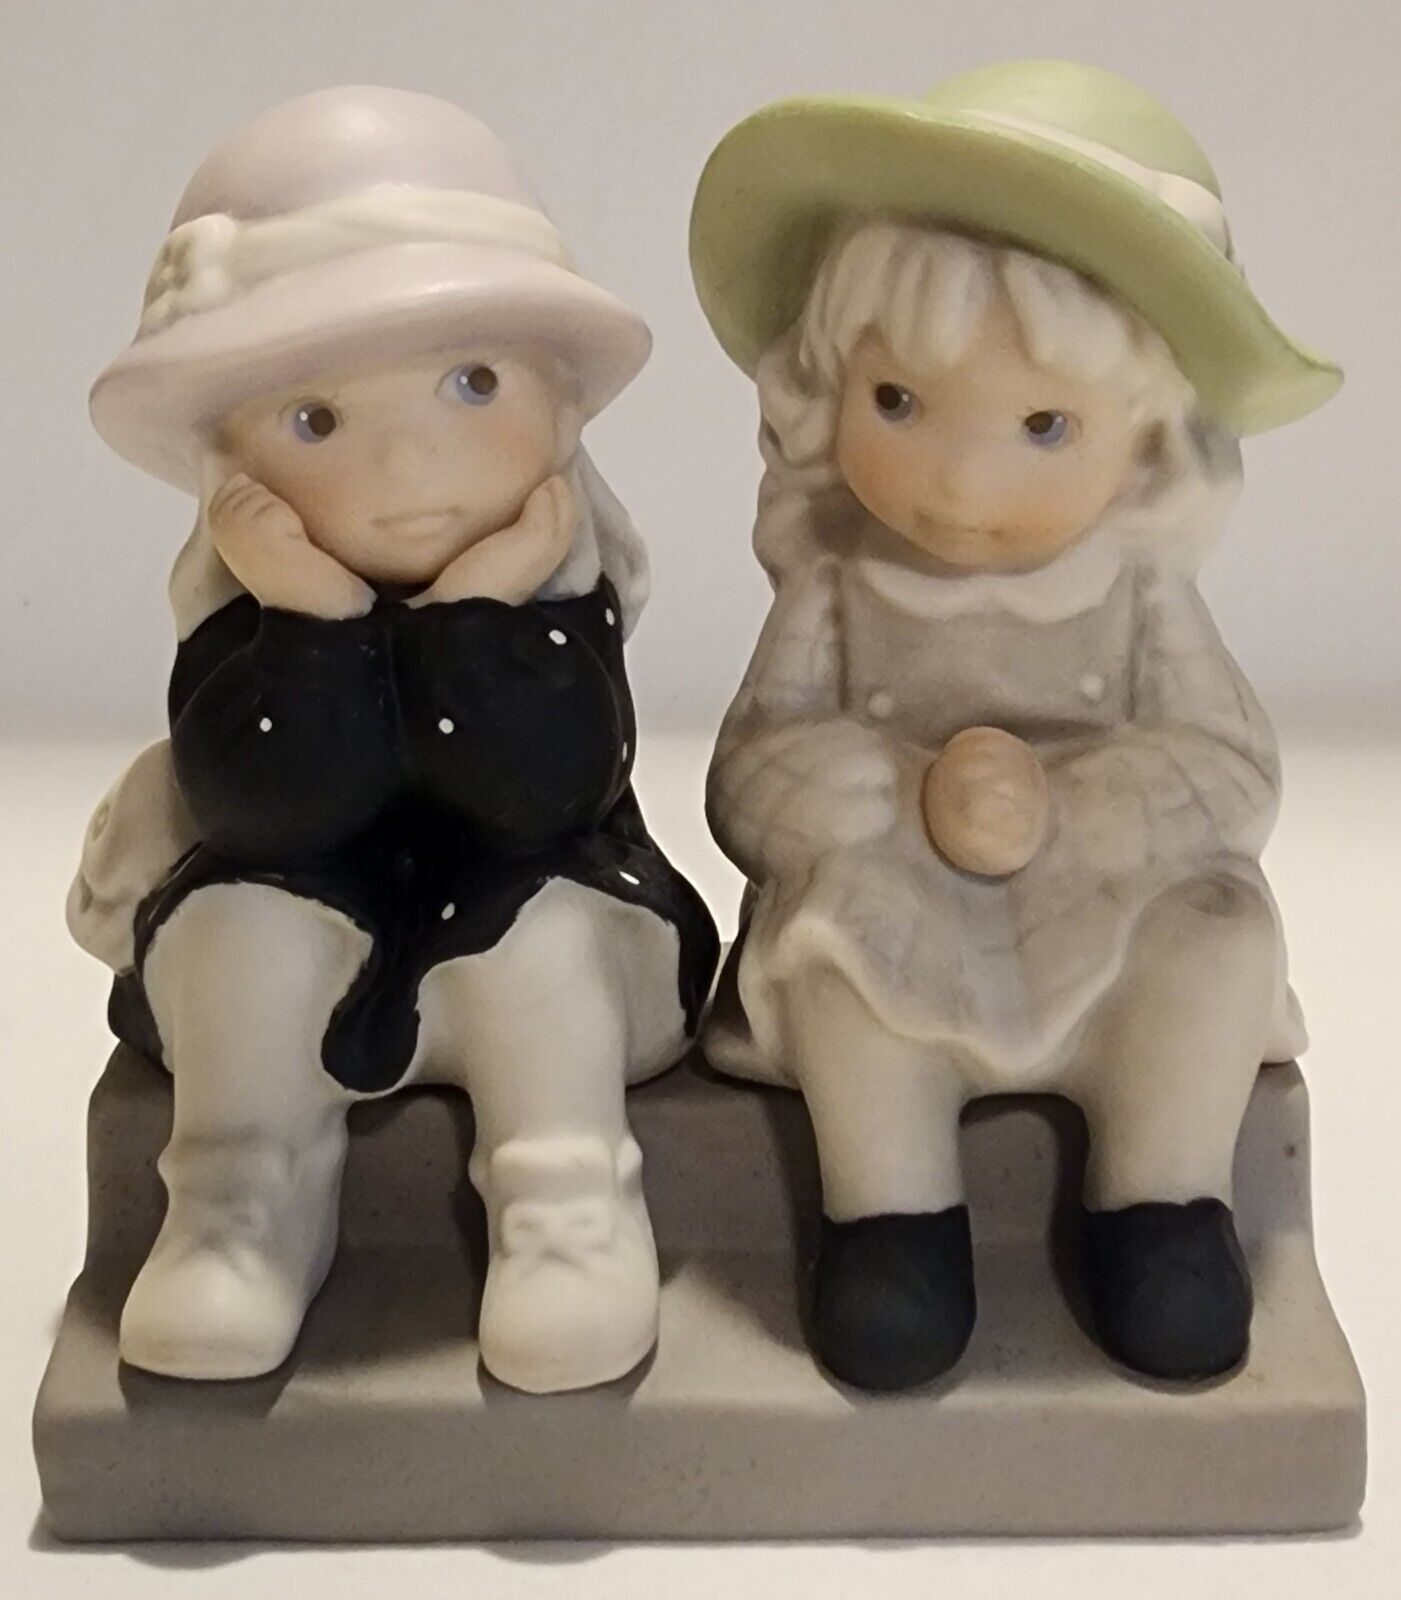 Vtg 95 \'We\'re Two Of A Kind\' Sweet Friends Enesco Figurine by Kim Anderson 